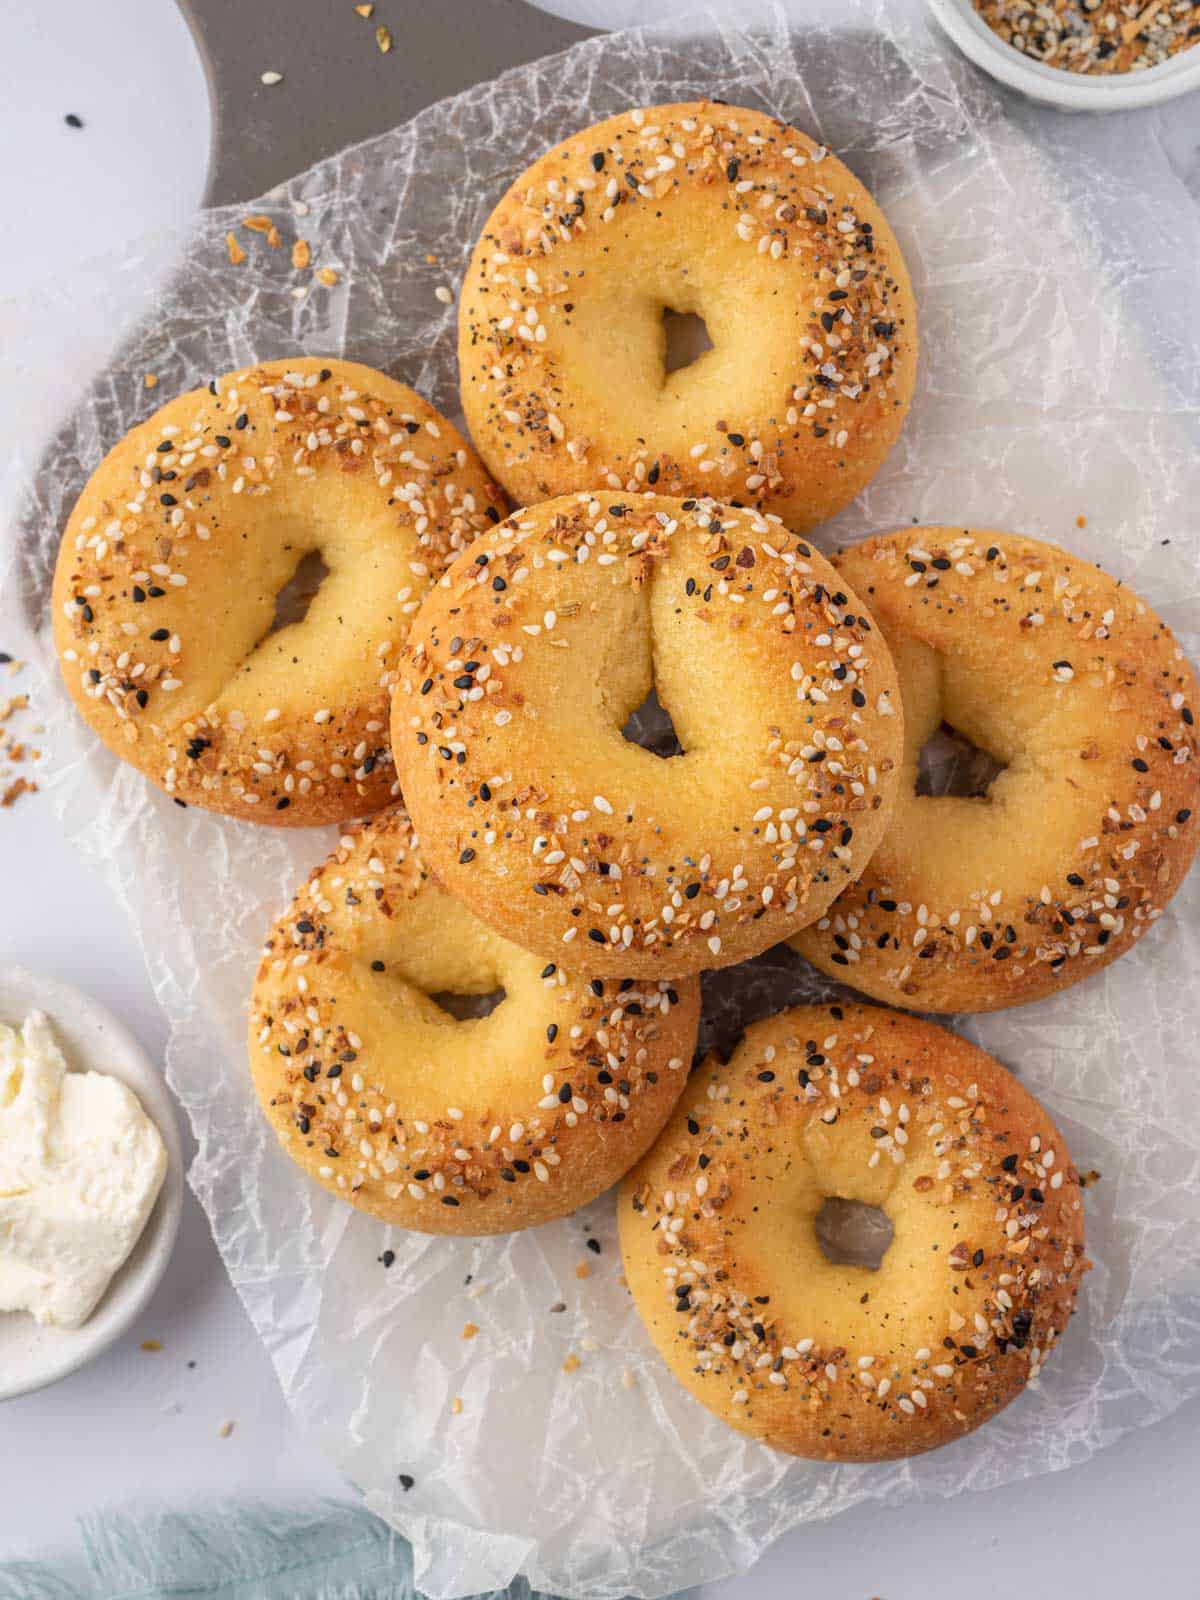 Low carb everything bagels in a pile.